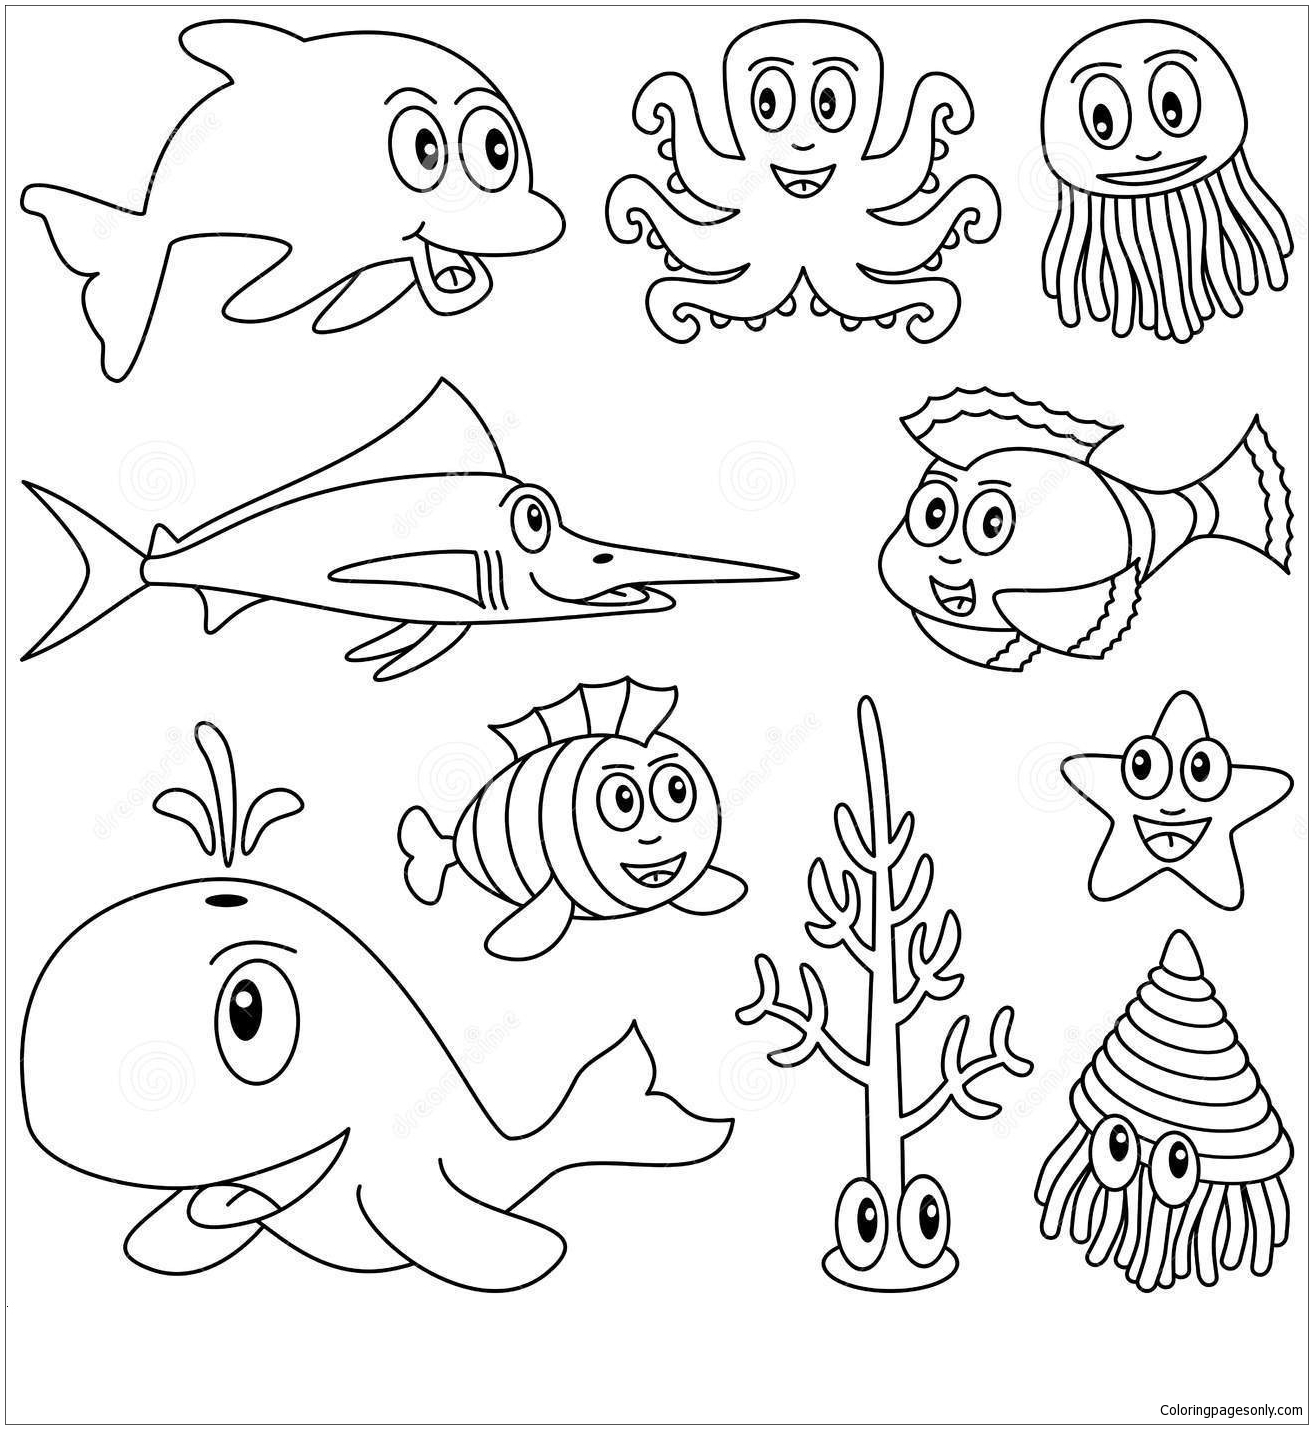 sea-animals-1-coloring-page-free-printable-coloring-pages